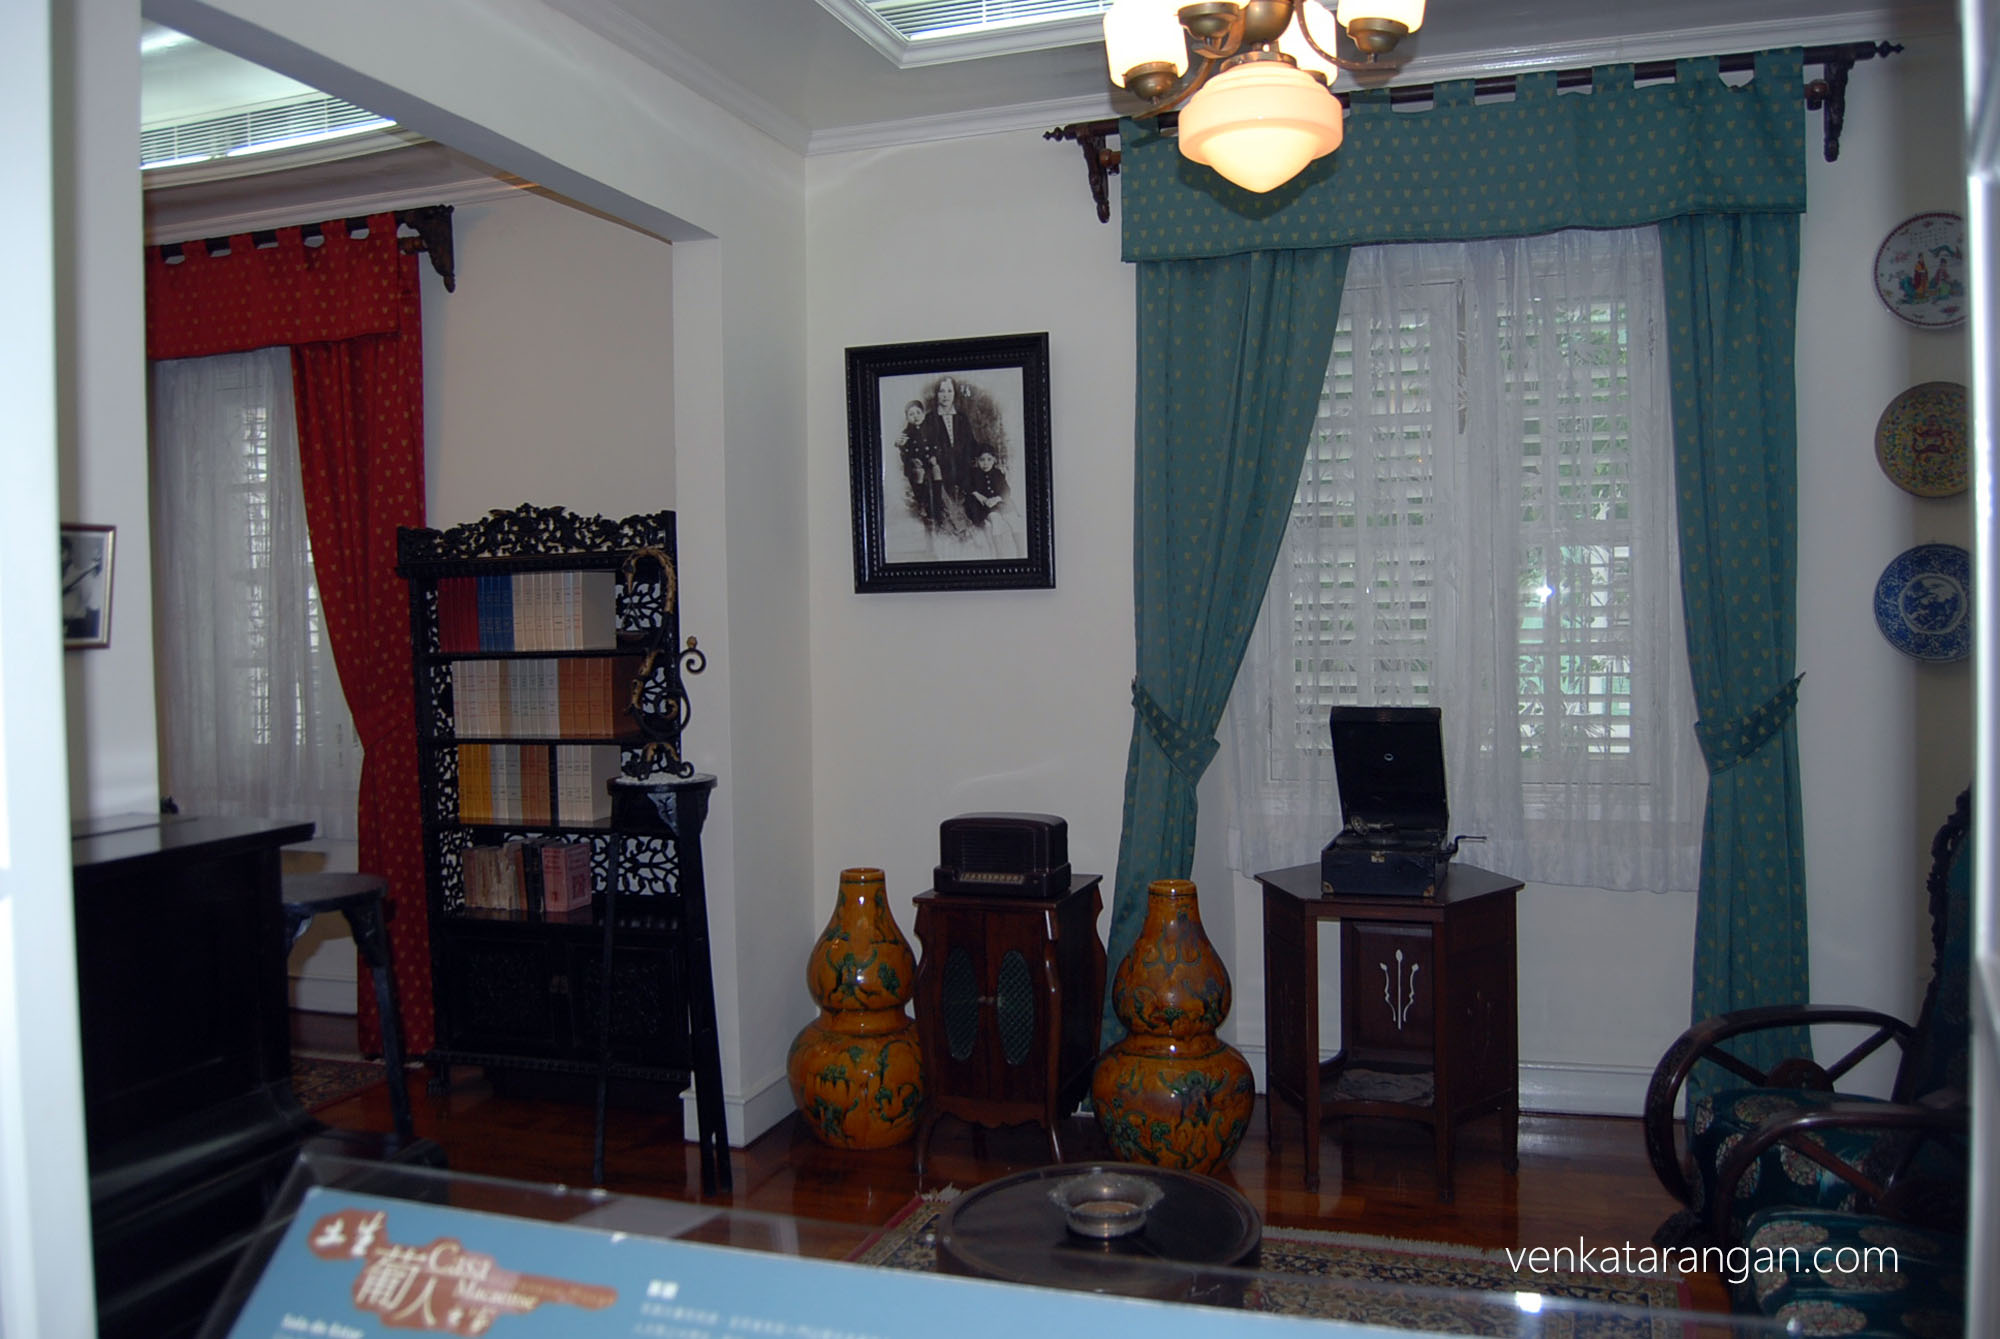 Furniture preserved as they were when the Portuguese colonial rulers lived here